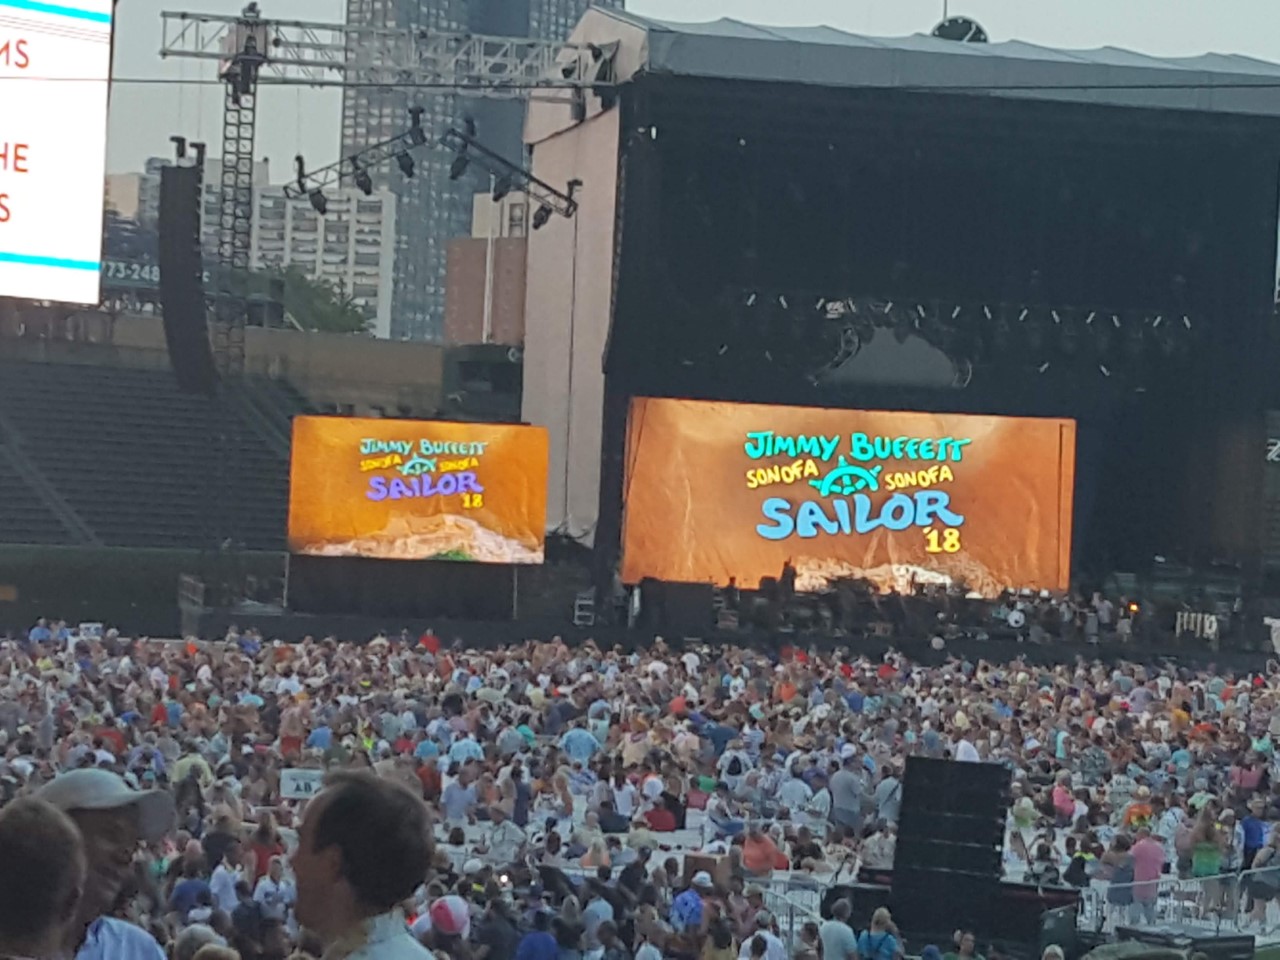 Concert at Wrigley Field in Chicago Il